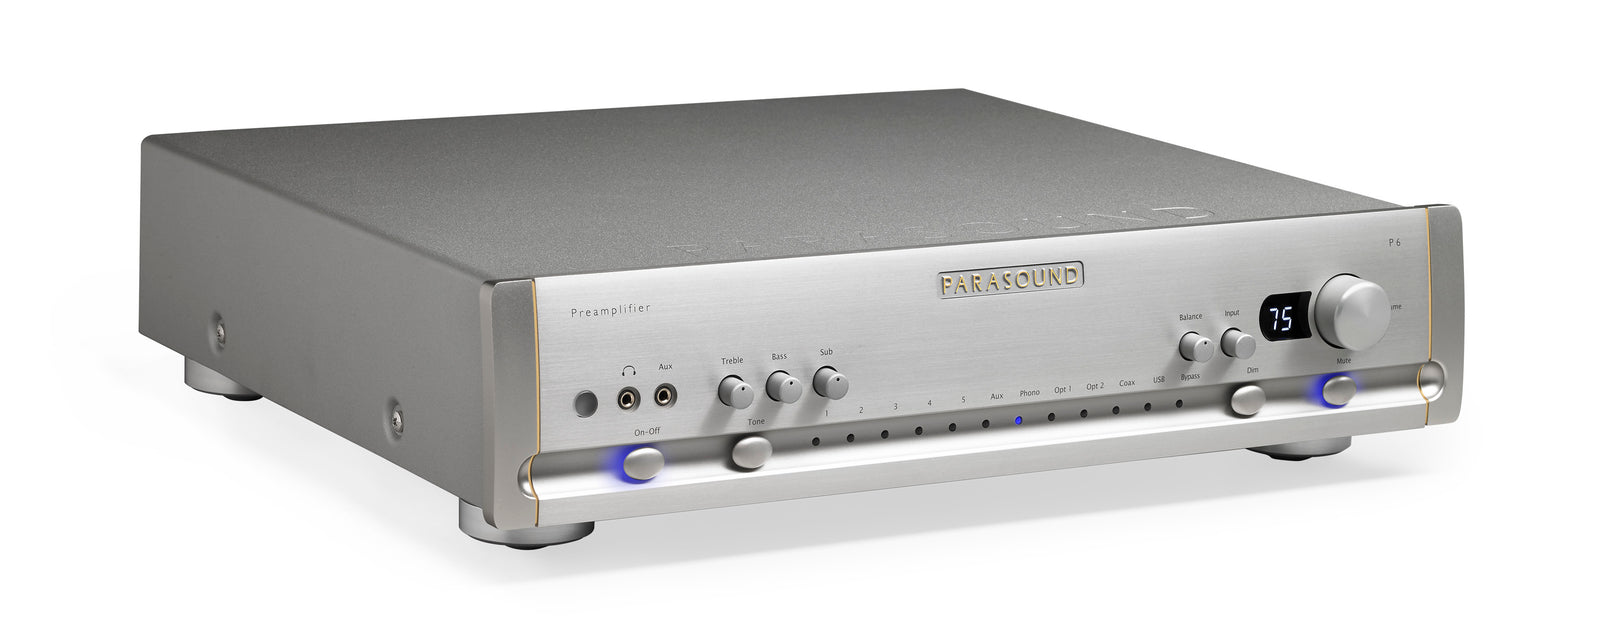 PARASOUND HALO P6 PREAMPLIFIER & DAC - With a great sound into stunning packages, find all Parasound model Halo P 6 - Model Halo JC 5 - A51 - A52+ - JC 2 BP - Zpre3, A 21+ Stereo Power Amplifier, Amplifier, Mono Power Amplifier, Phono Preamplifier, Integrated Amplifier & DAC, Speaker Amplifier and more available at Vinyl Sound. We have mastered the art of assembling audio systems capable of reproducing music so perfectly, providing you with emotional experiences and satisfaction for many years to come...